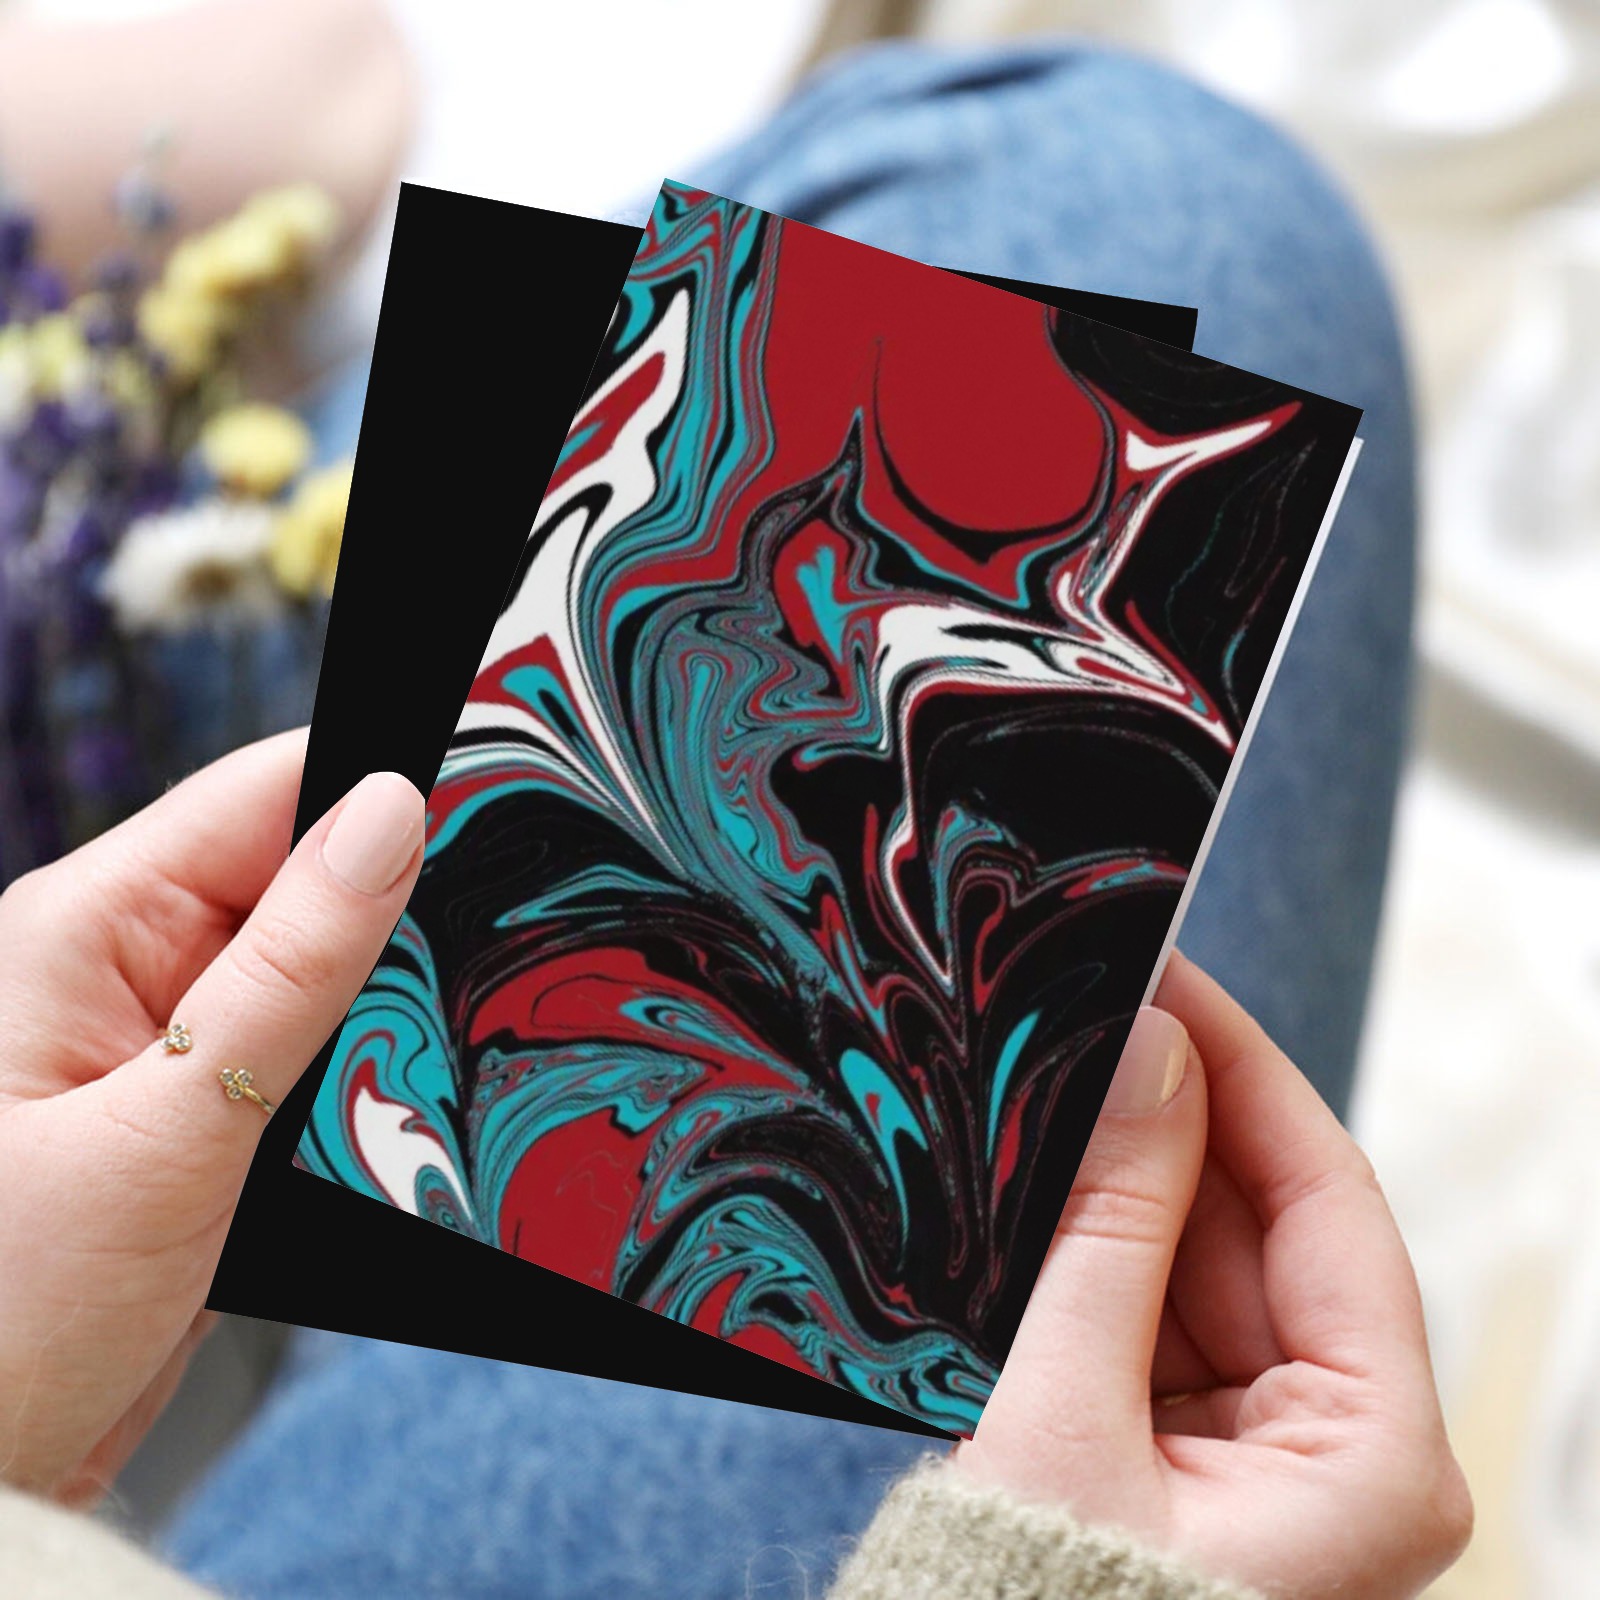 Dark Wave of Colors Greeting Card 8"x6"